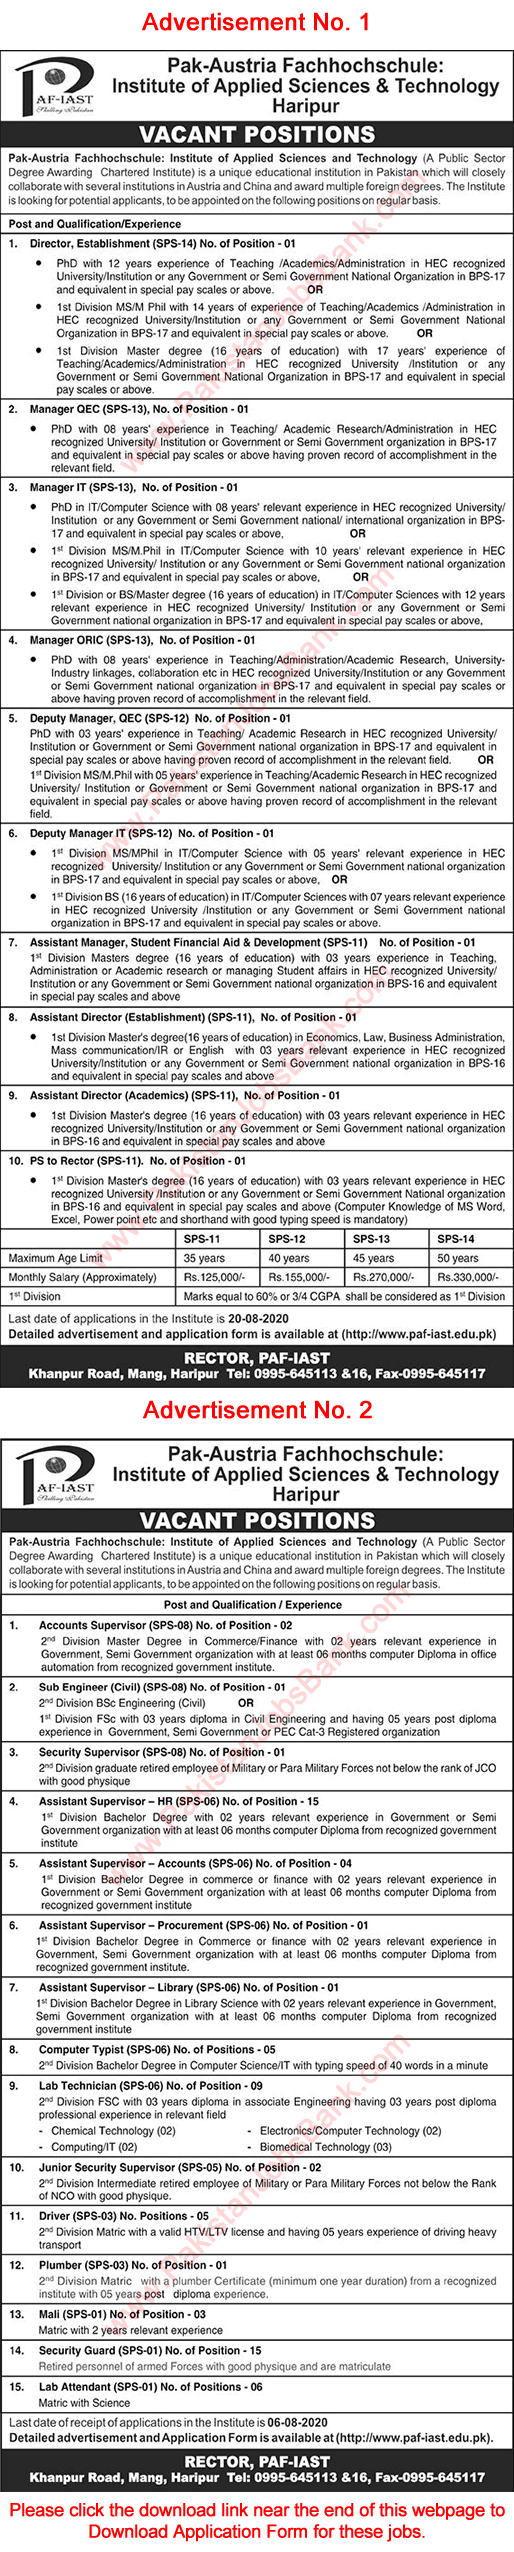 PAF IAST Haripur Jobs 2020 July Application Form Pak-Austria Fachhochschule Institute of Applied Sciences & Technology Latest